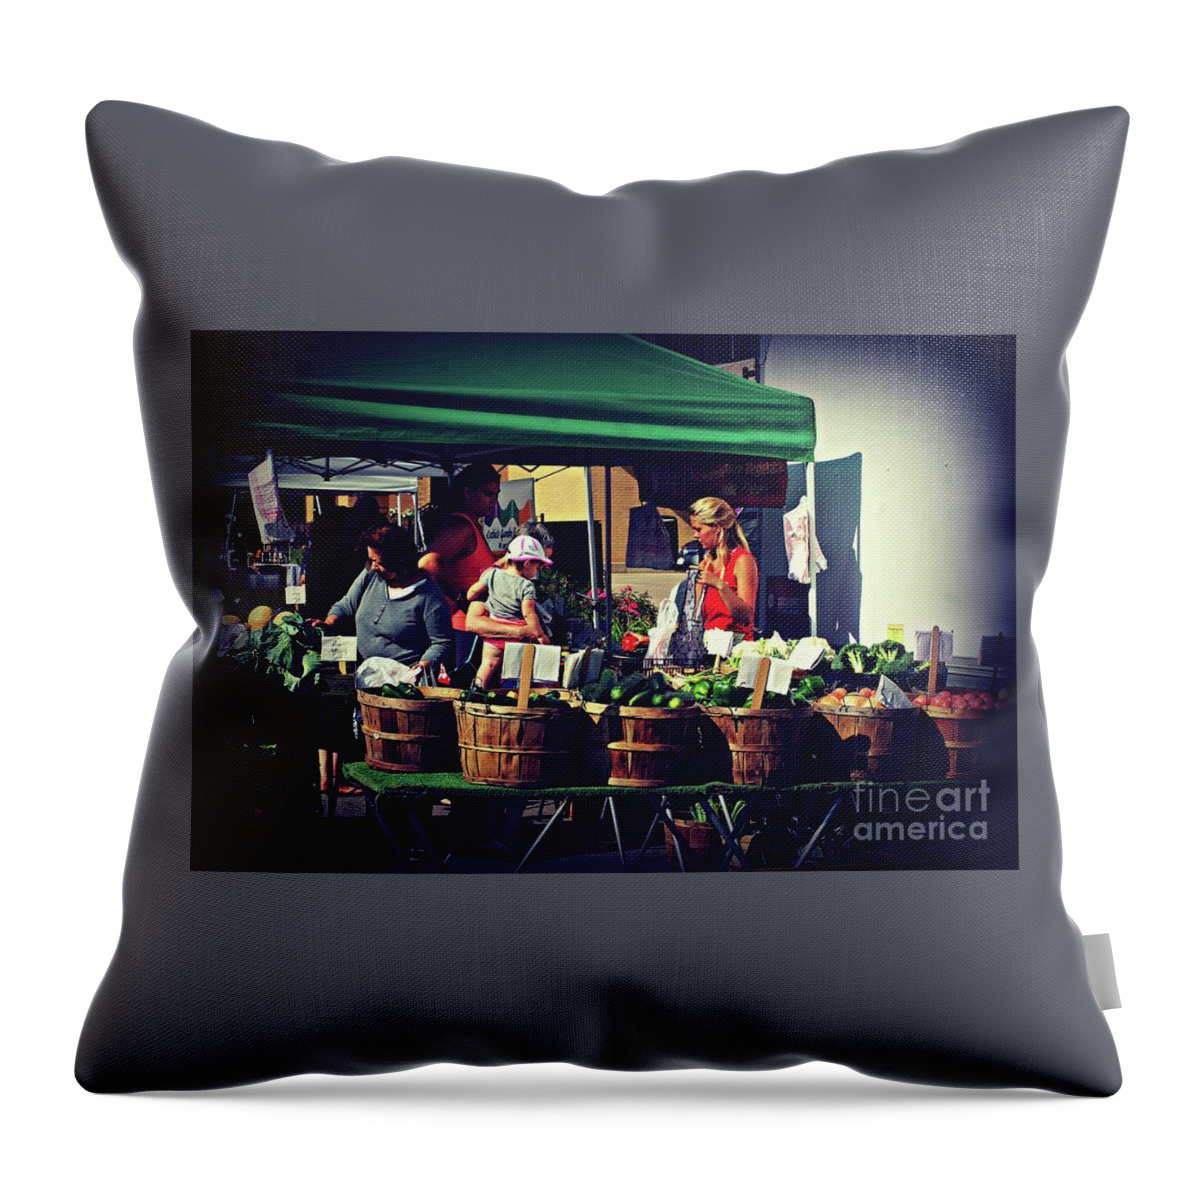 Photography Throw Pillow featuring the photograph Farmers Market Produce by Frank J Casella